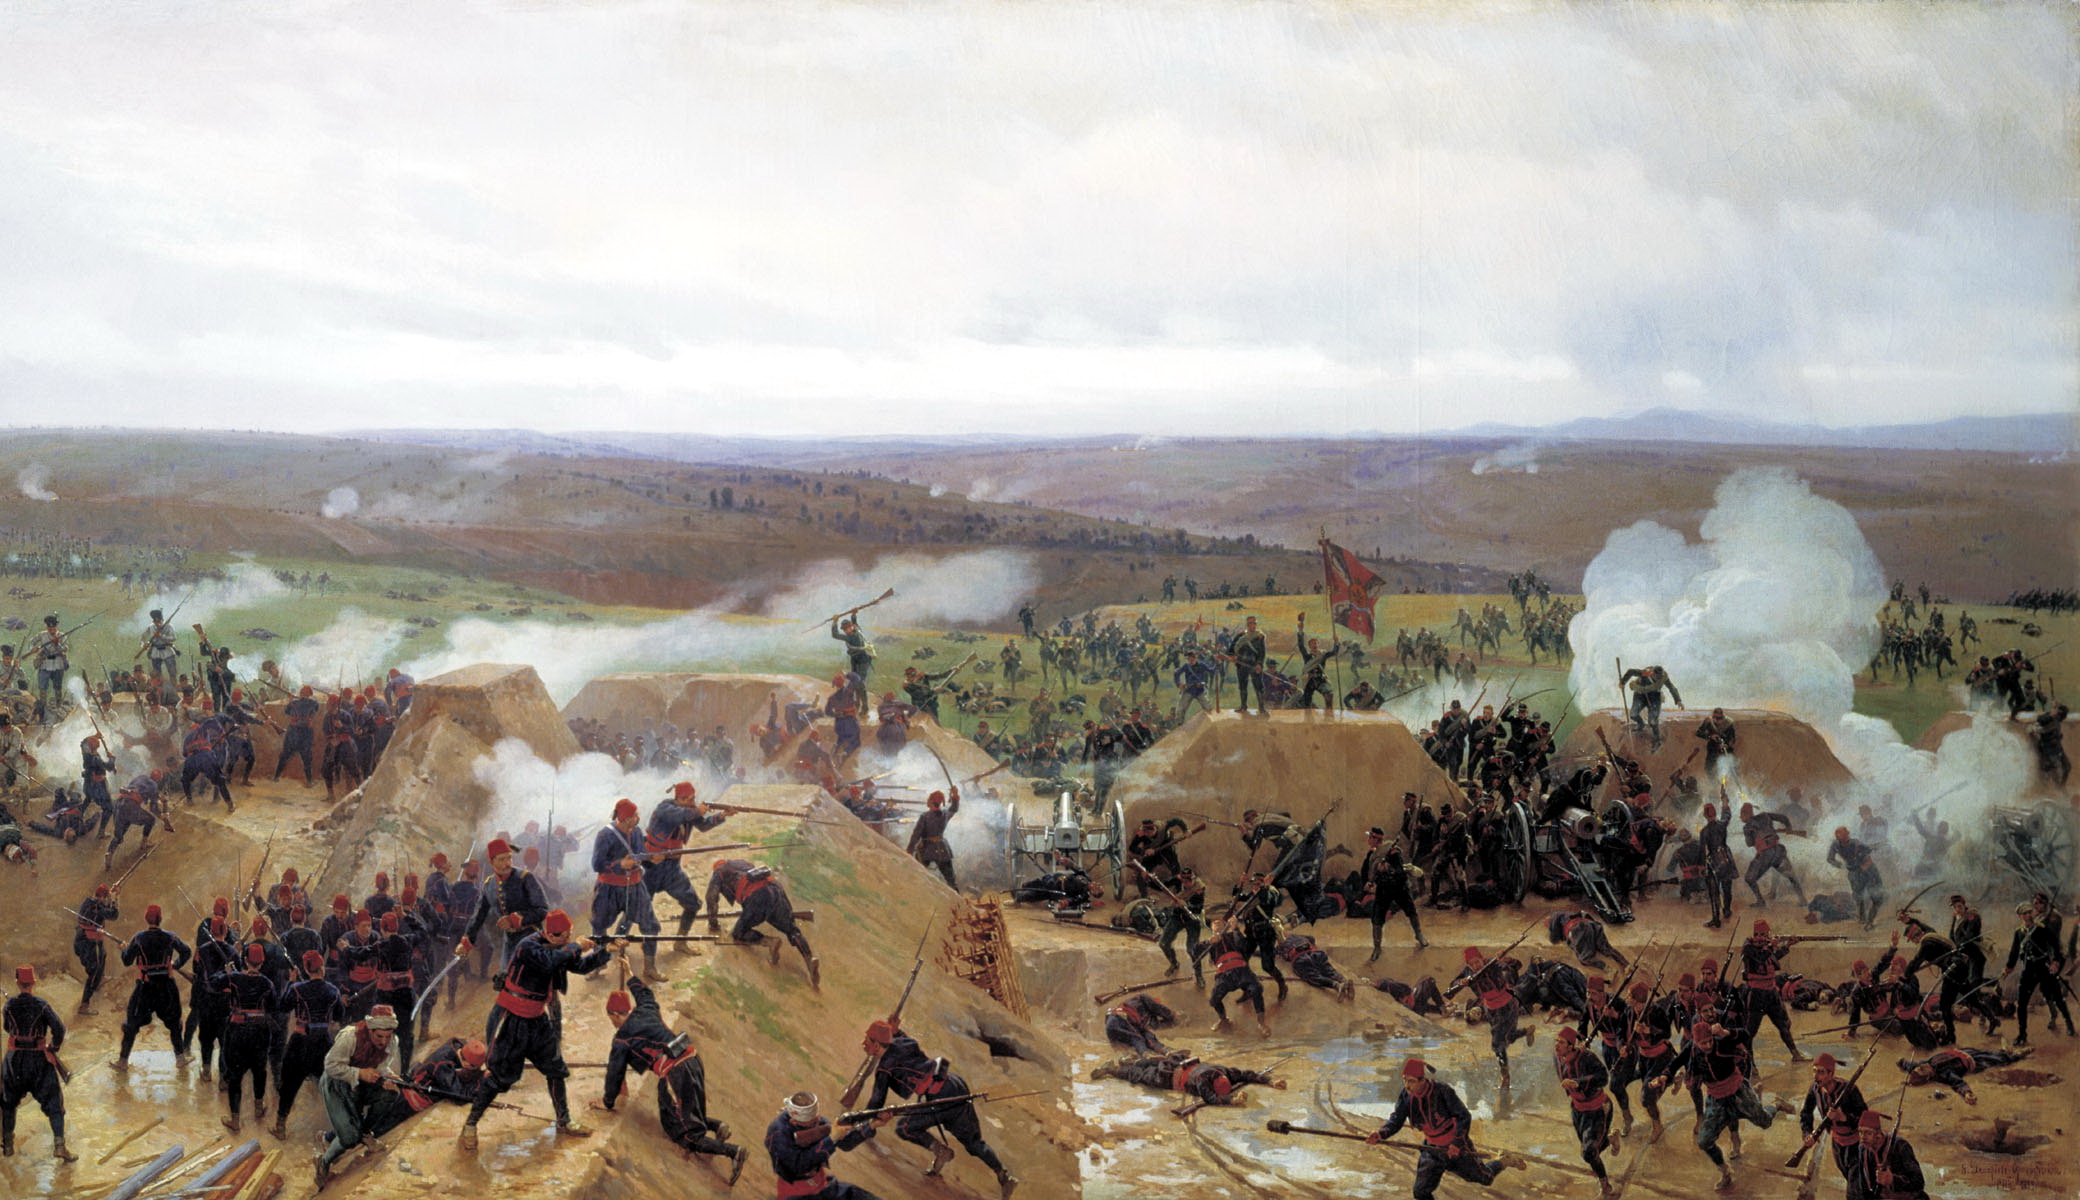 Nikolay Grivitsa-Orenburgsky. Taking of the Grivitsa redoubt by the Russians during the Russo-Turkish War of 1877–1878.